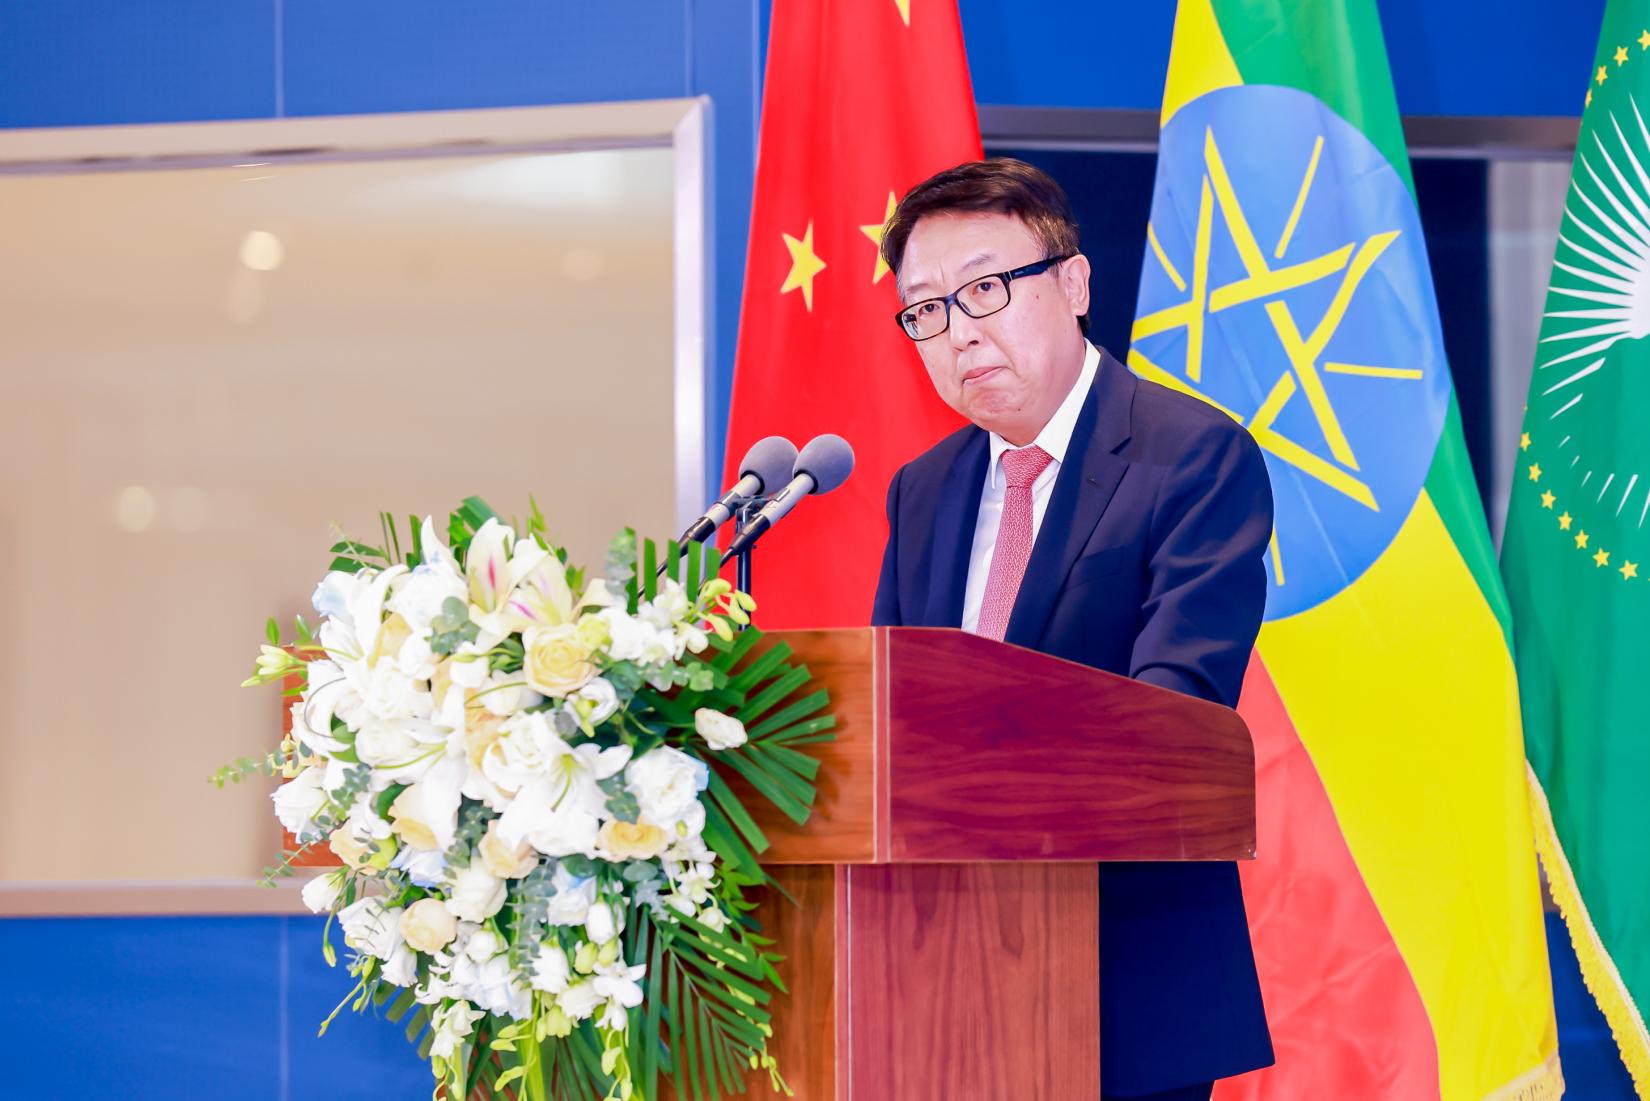 Mr. Wu Peng, Director General, Department of African Affairs, Ministry of Foreign Affairs of the People’s Republic of China 